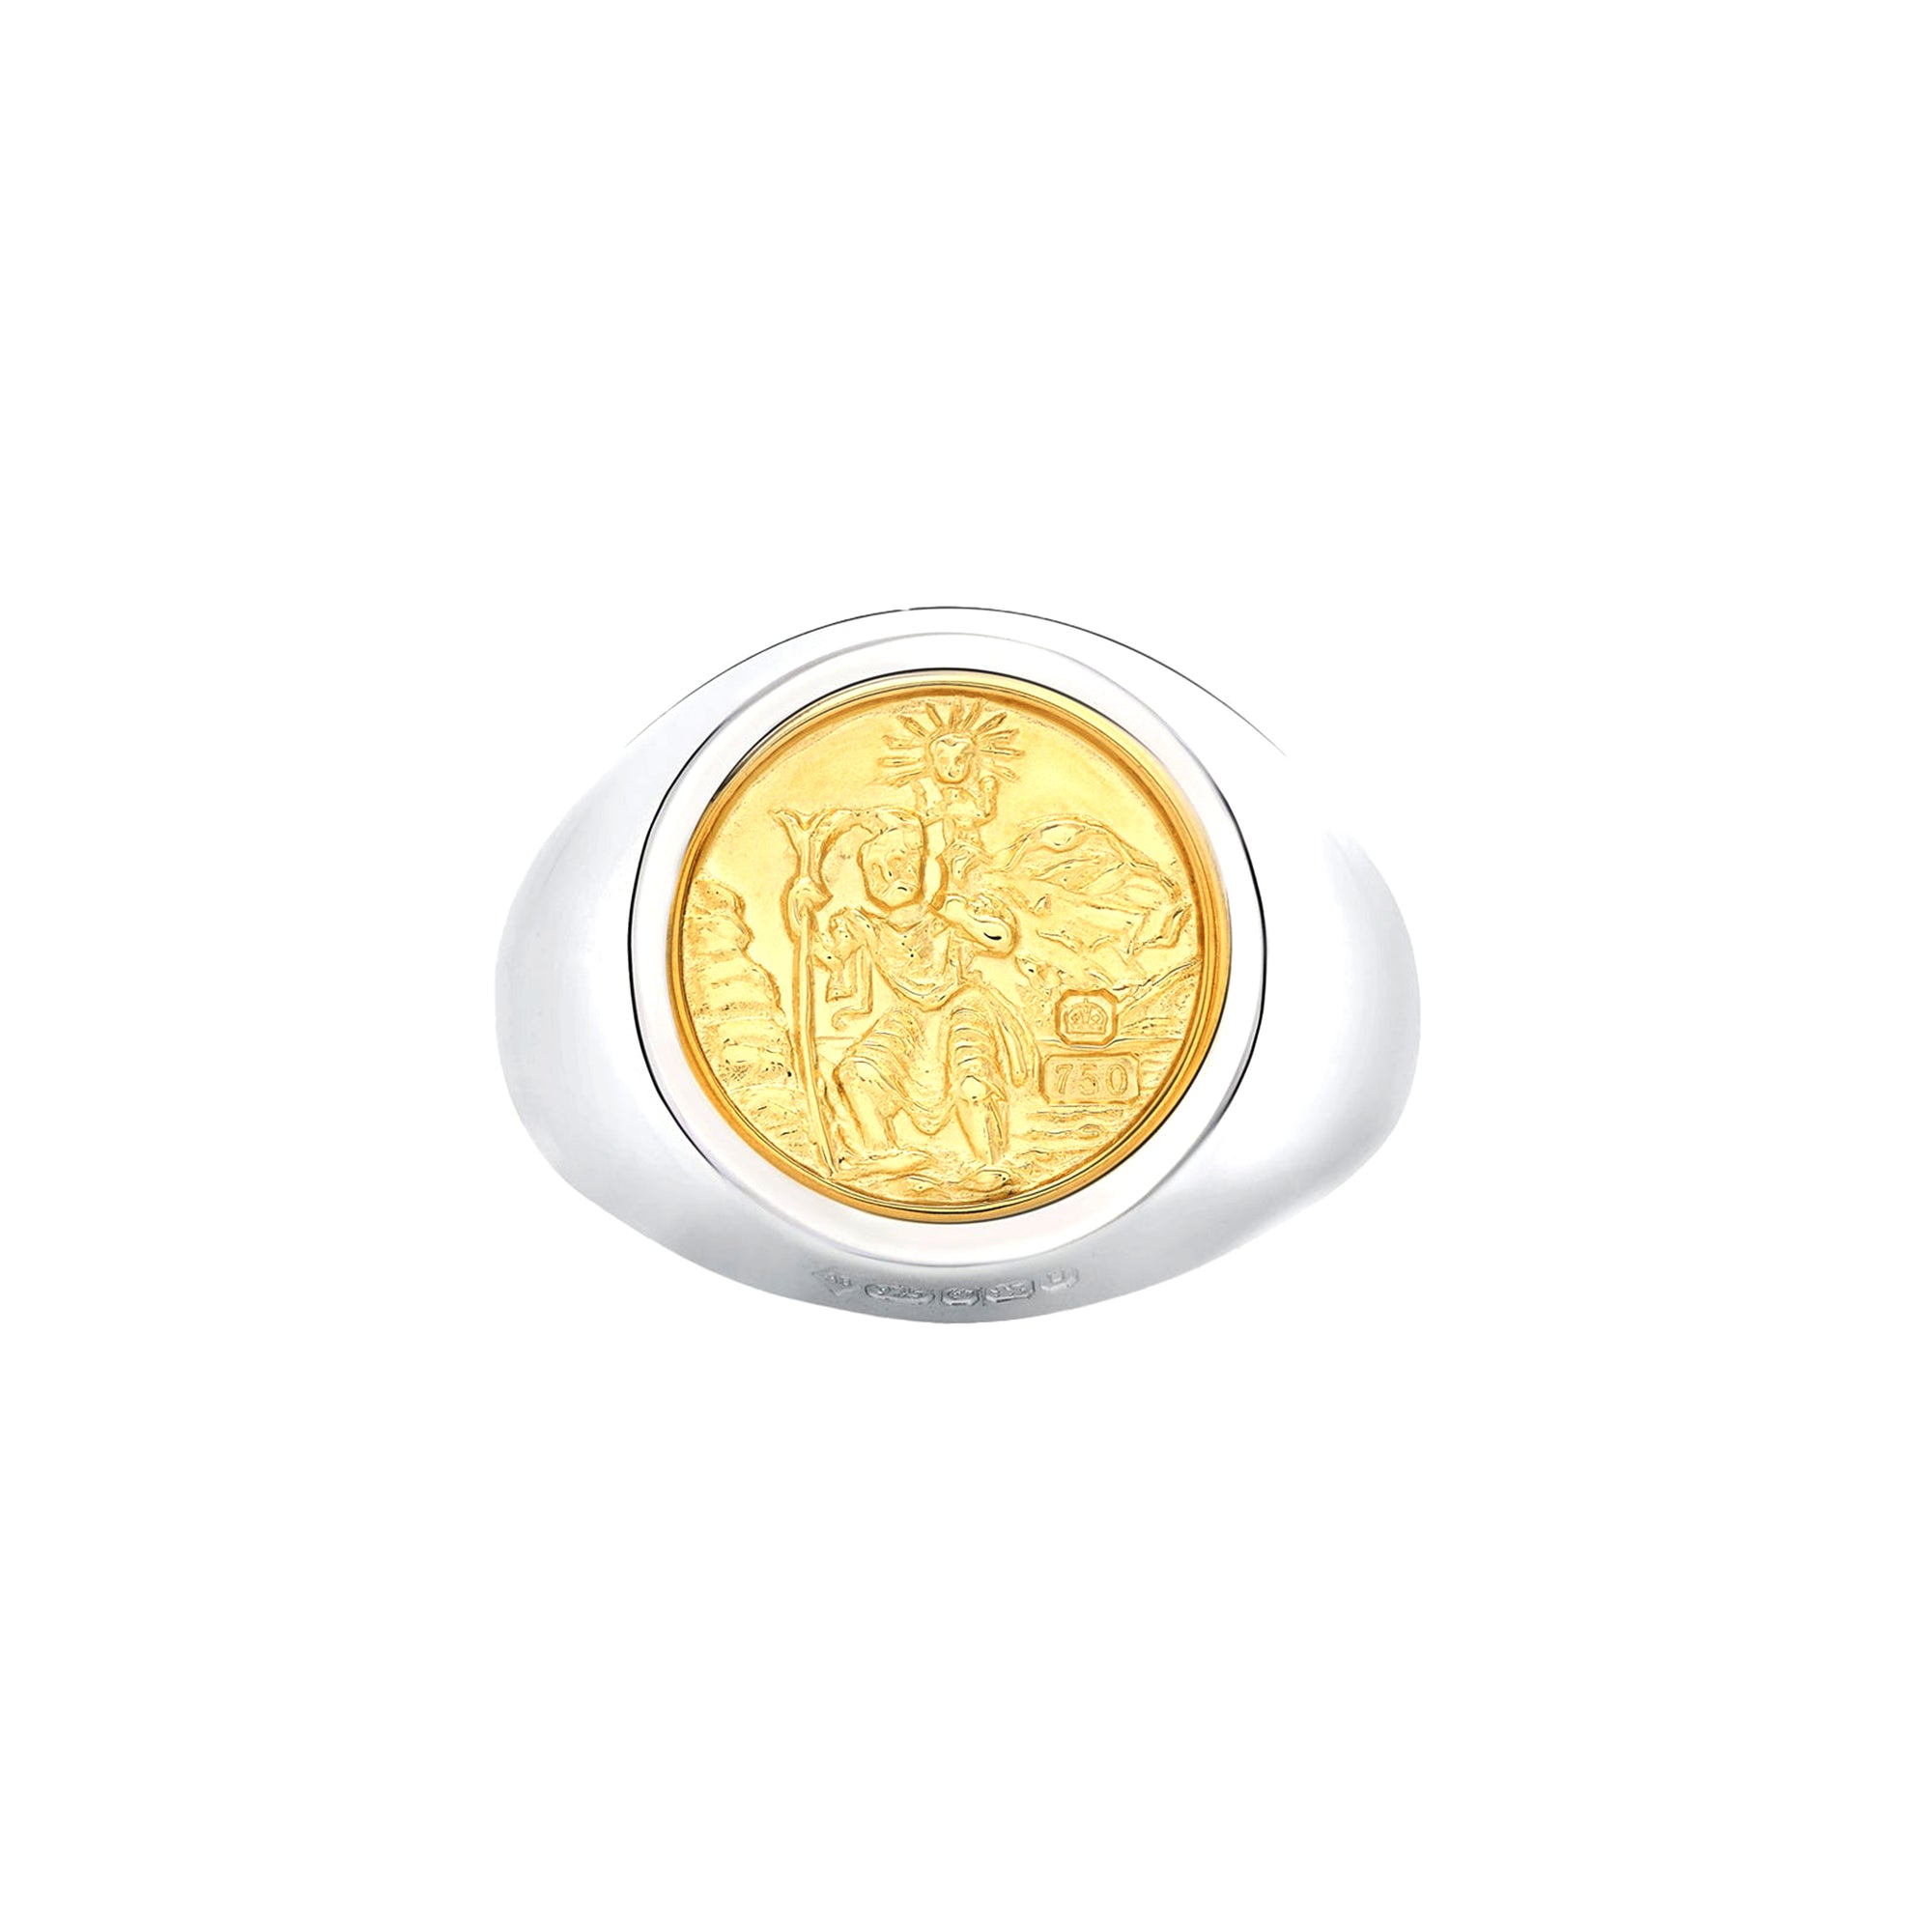 BUNNEY - St. Christopher Heavy Signet Ring / Silver 925 x 18ct Yellow Gold B0600131 view 1